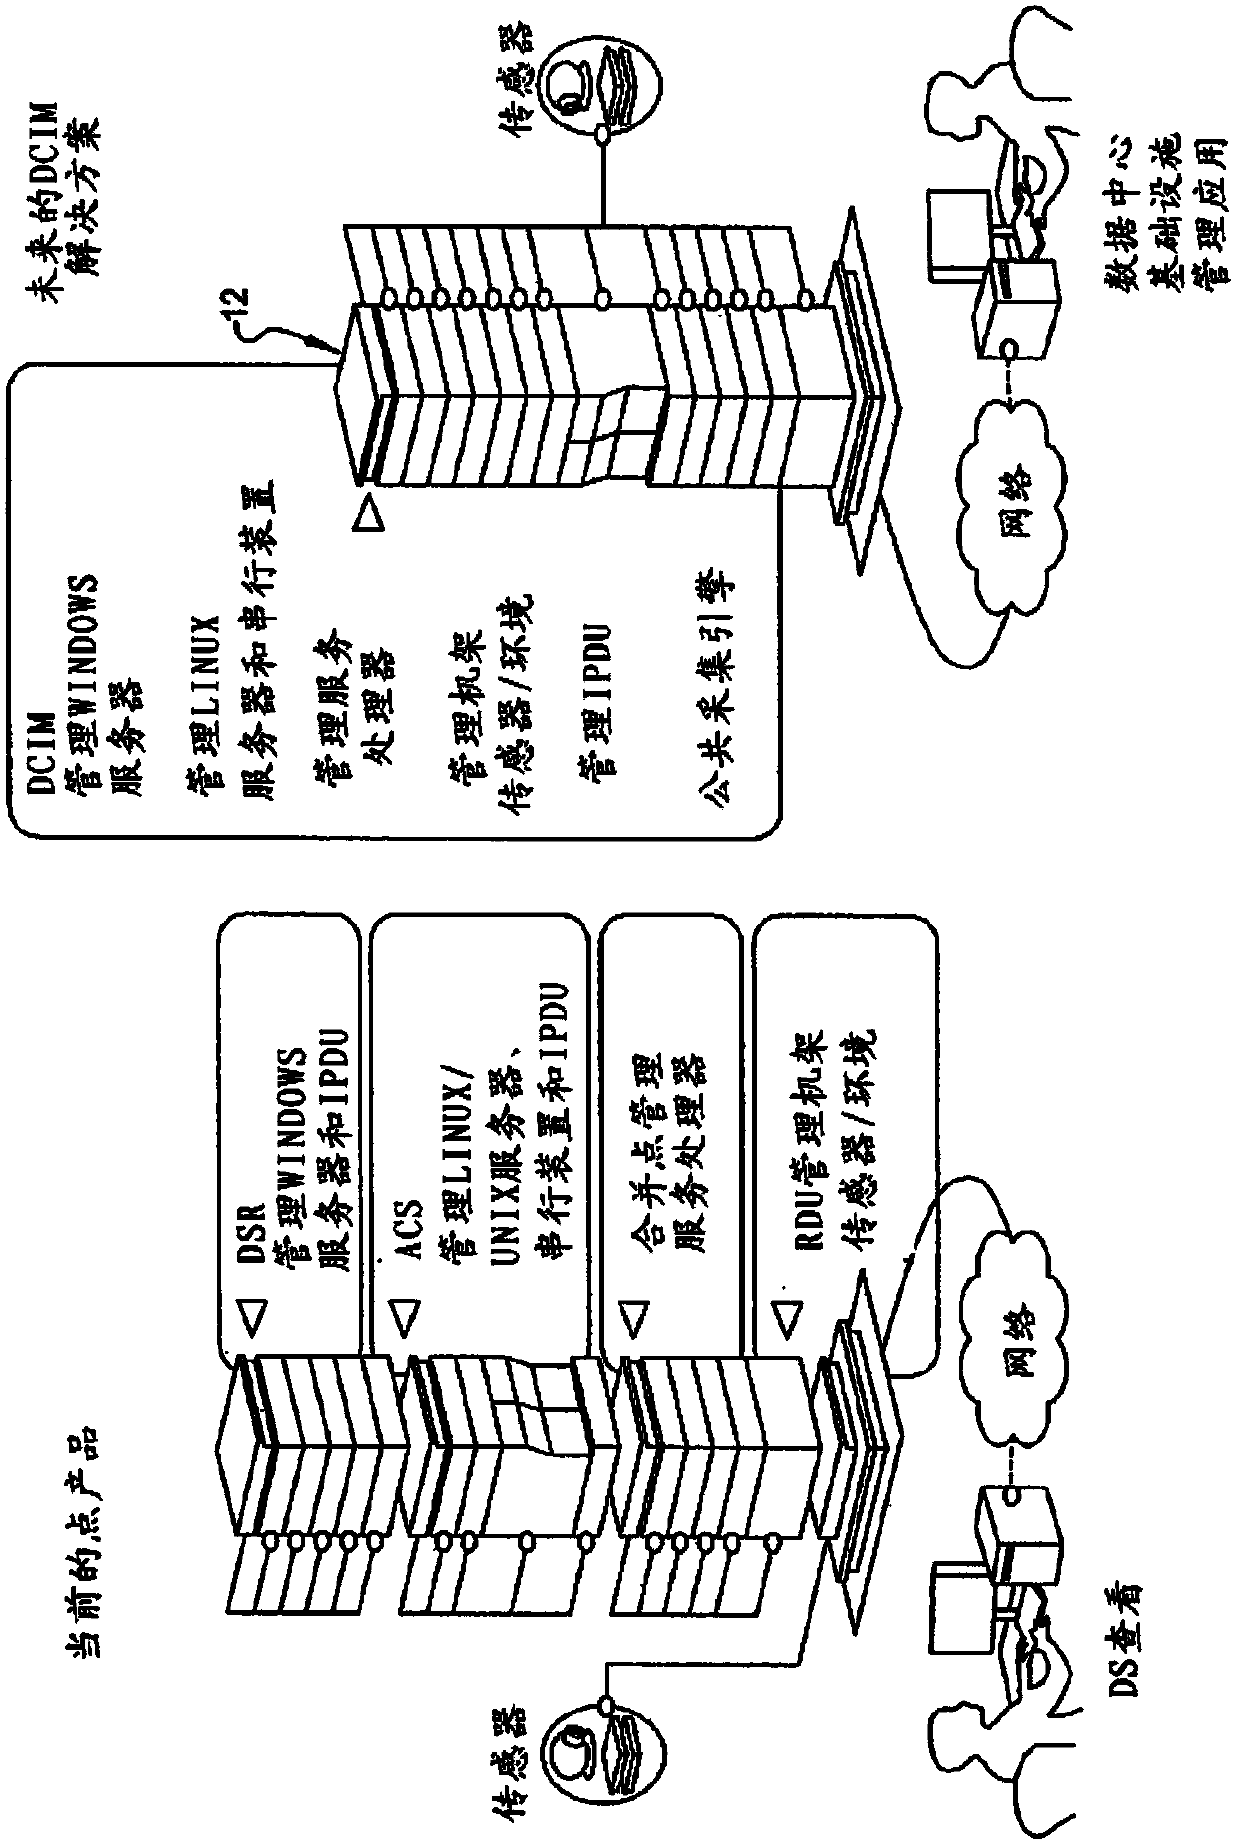 Infrastructure control fabric system and method